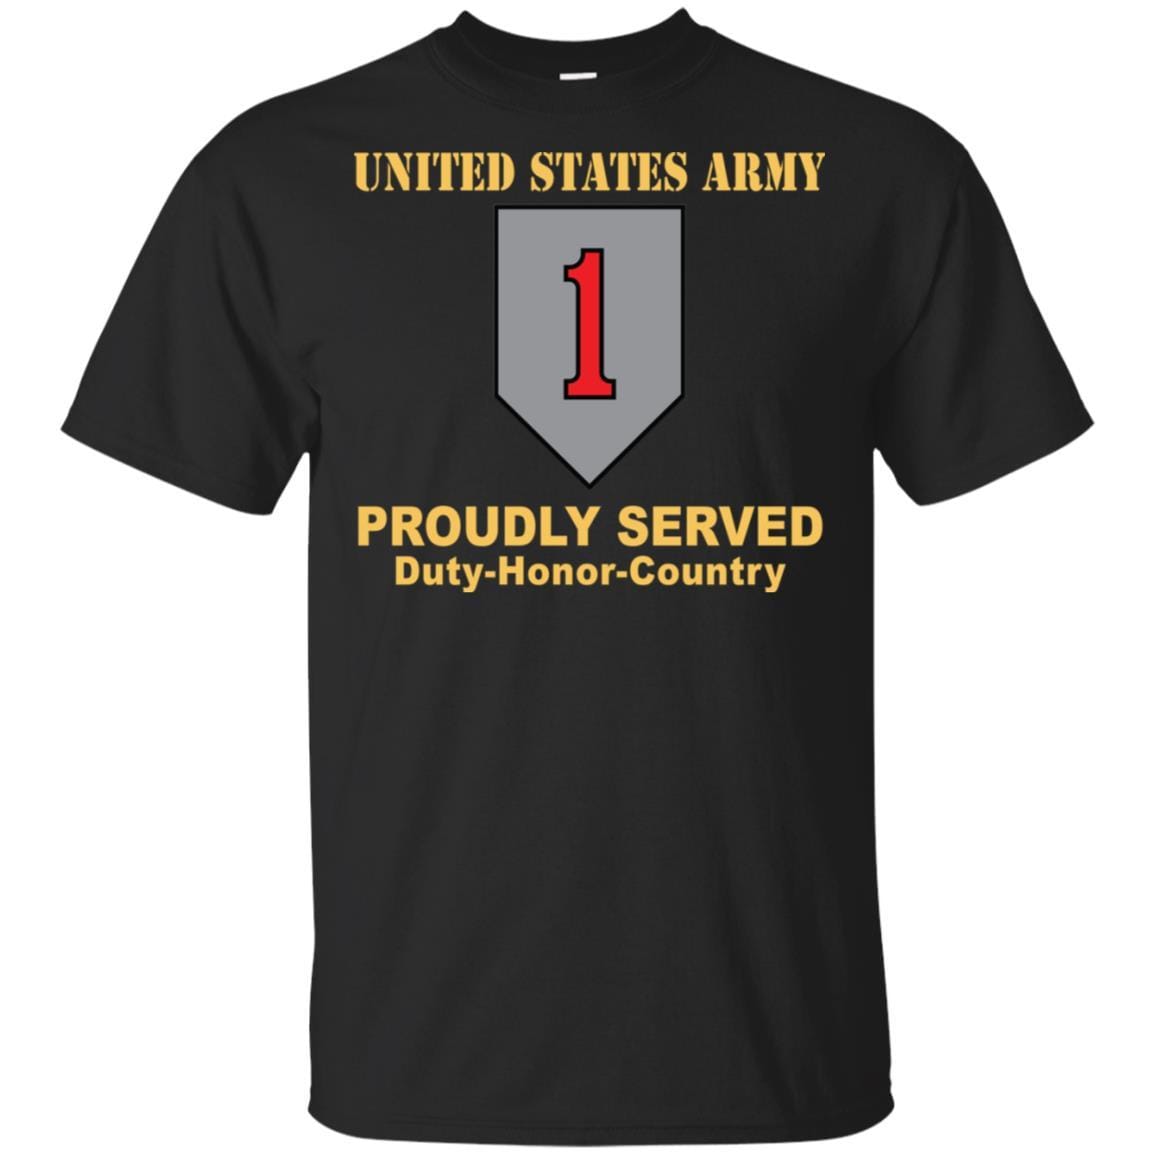 US ARMY 1ST INFANTRY DIVISION- Proudly Served T-Shirt On Front For Men-TShirt-Army-Veterans Nation